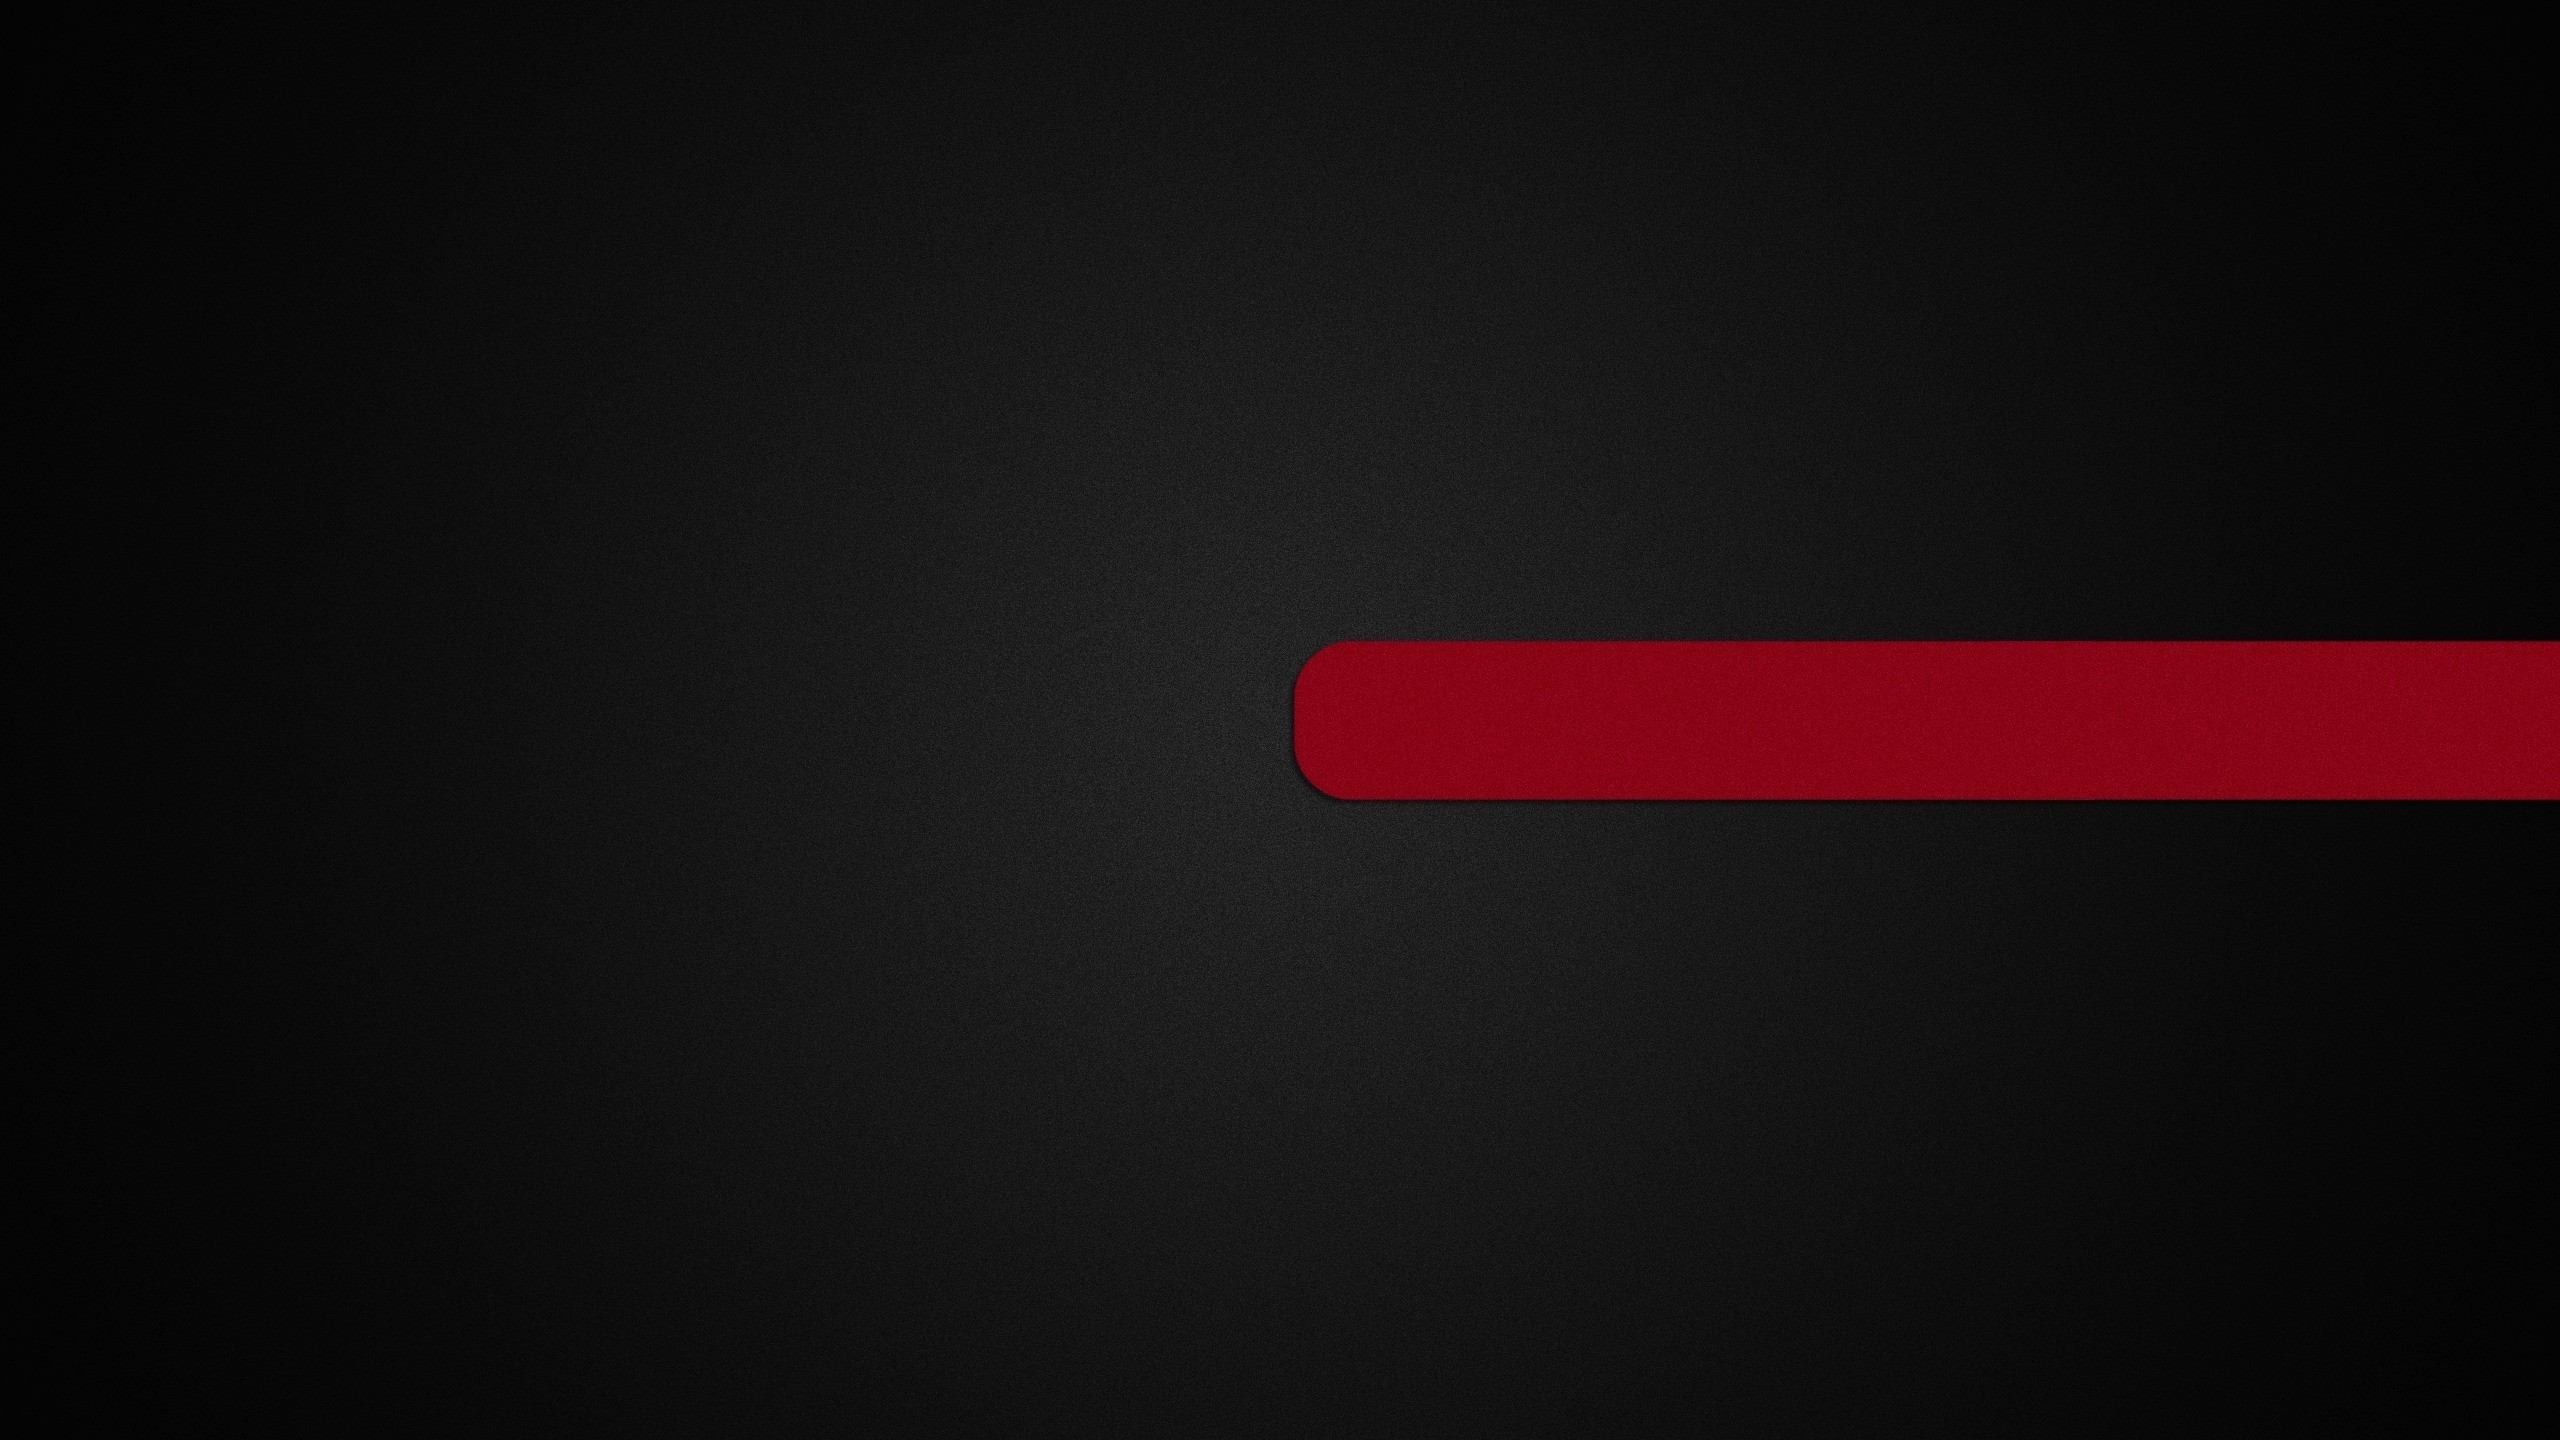 2560x1440 HD-black-and-red-iphone-wallpaper